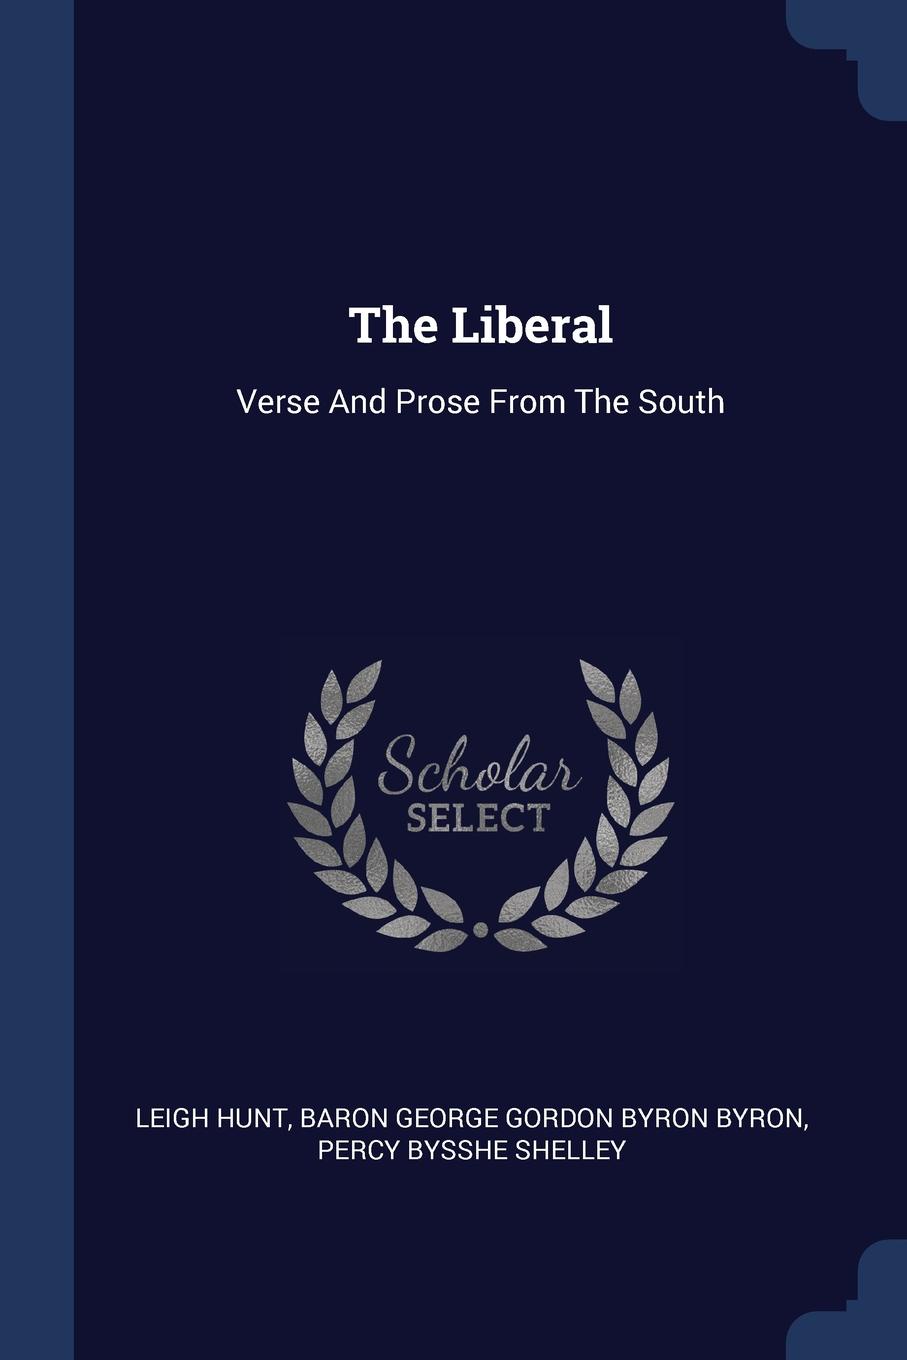 The Liberal. Verse And Prose From The South